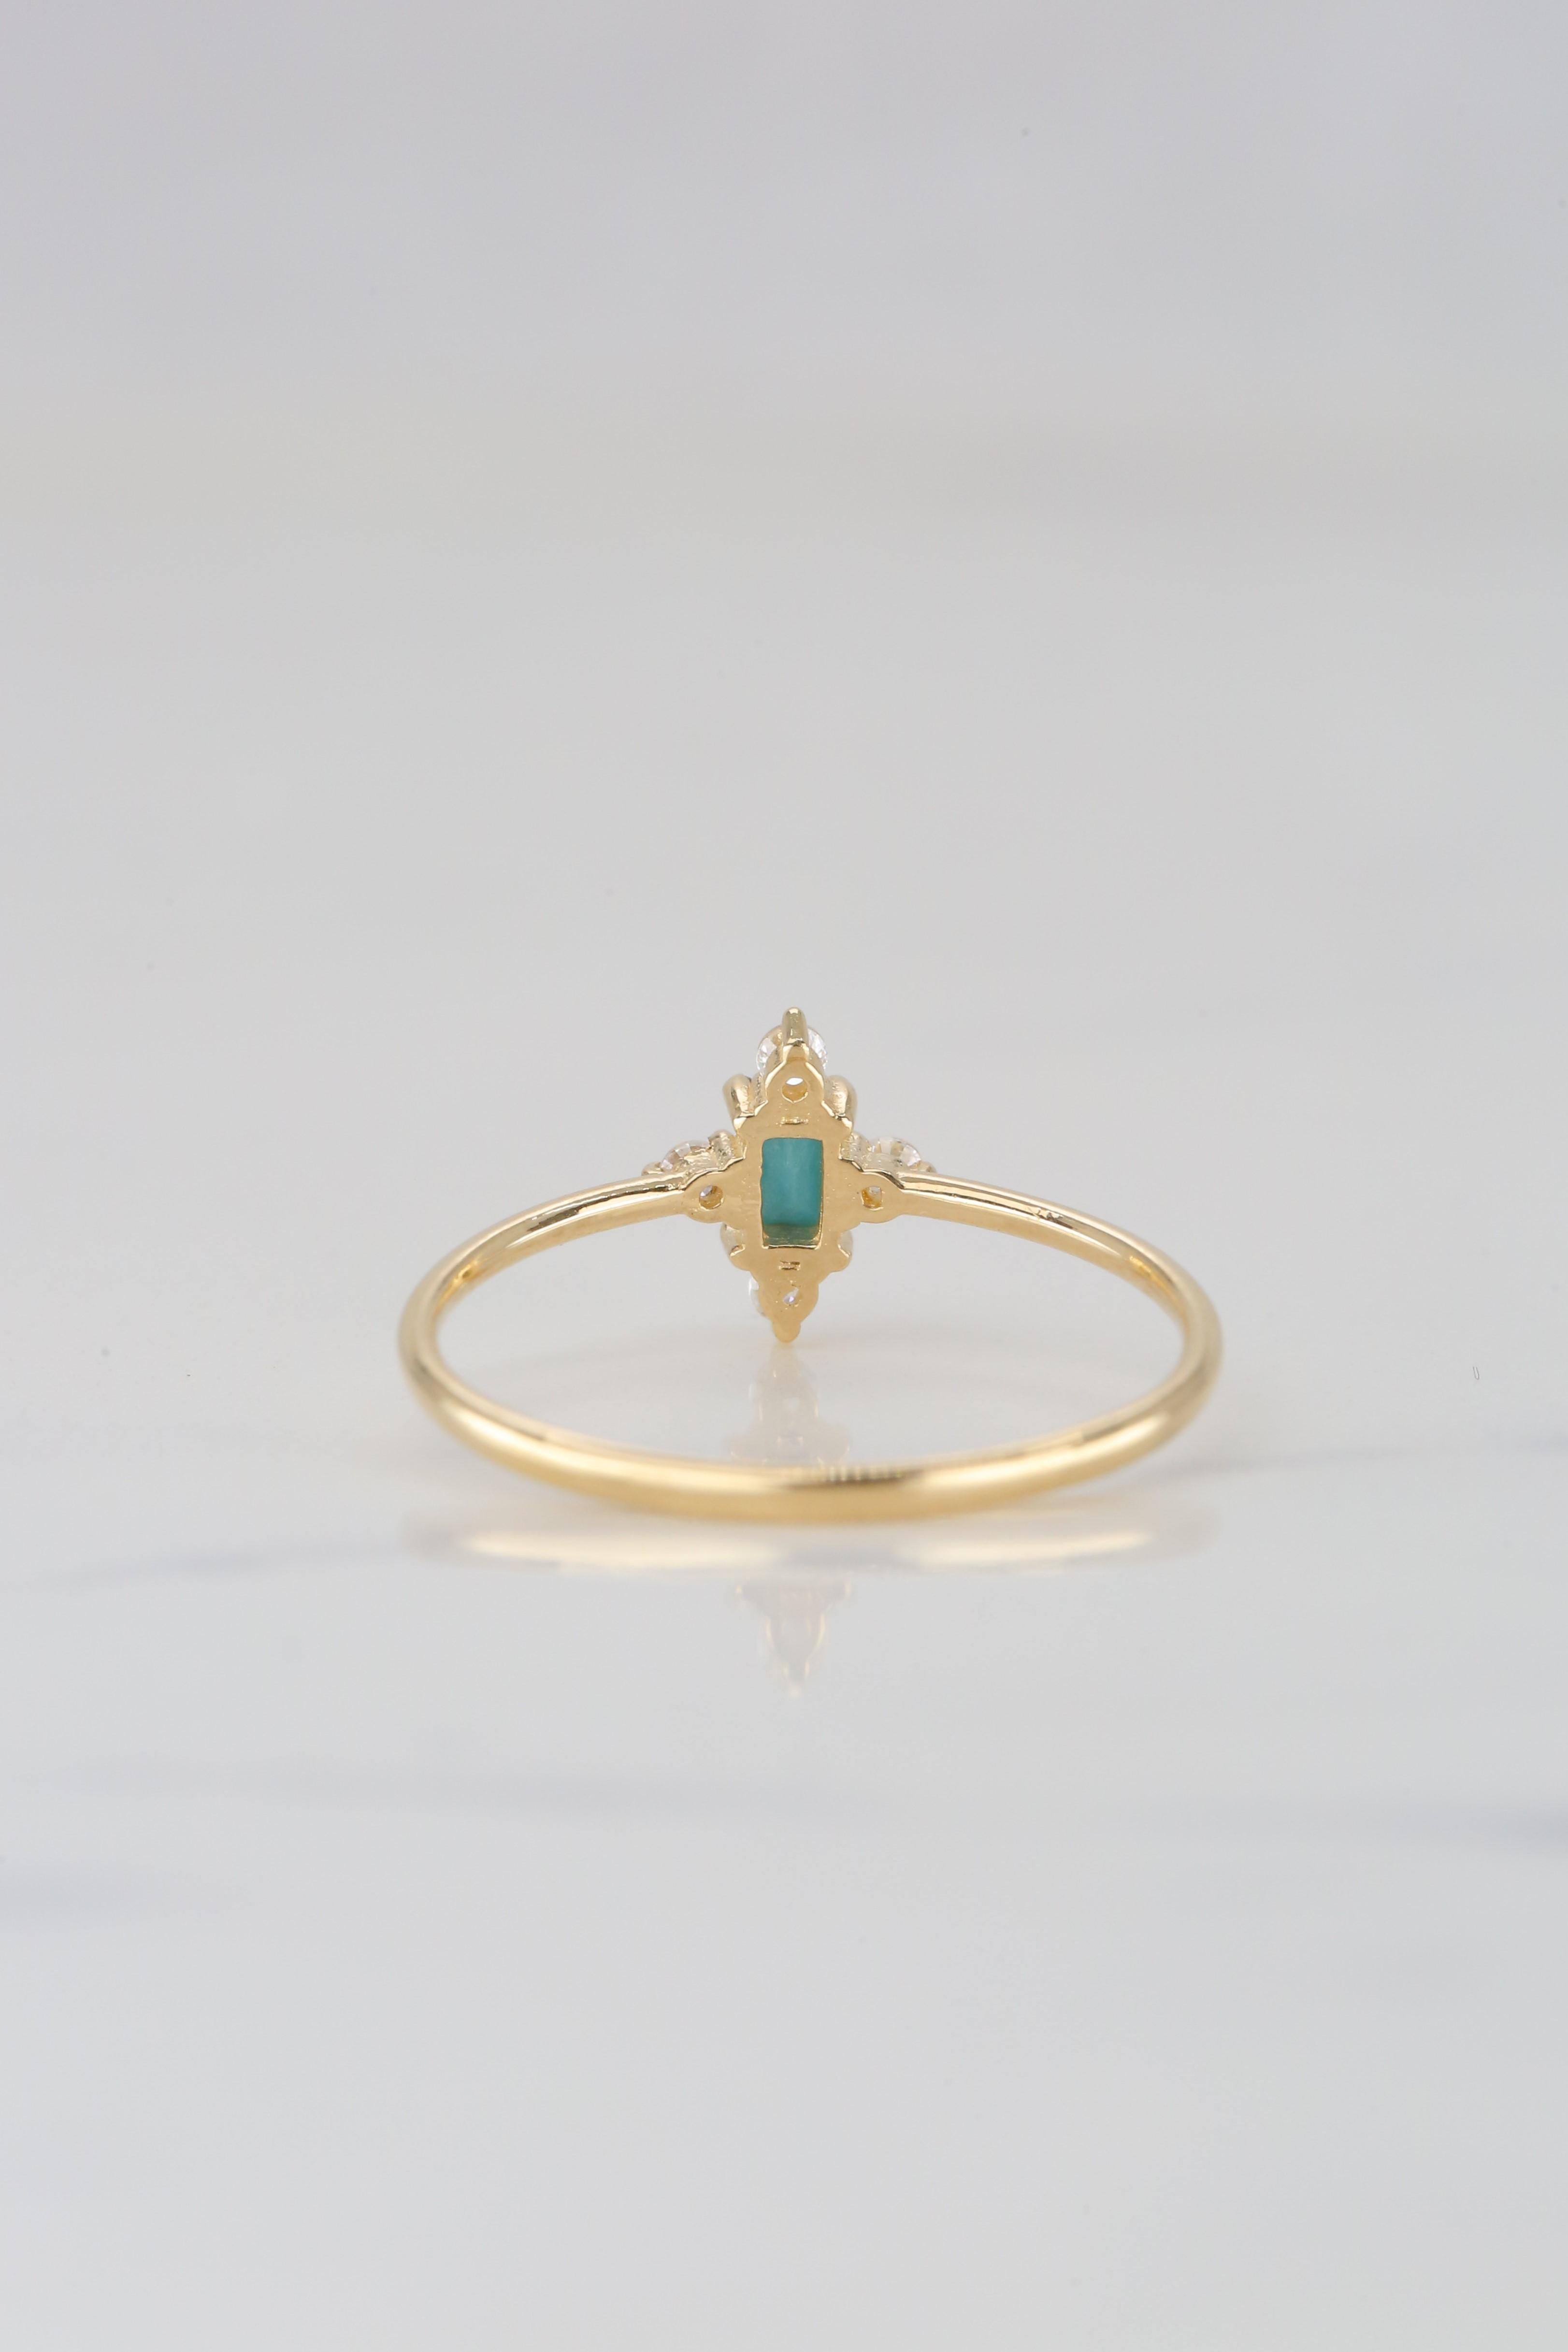 14K Gold Dainty Turquoise and Zircon Ring 10